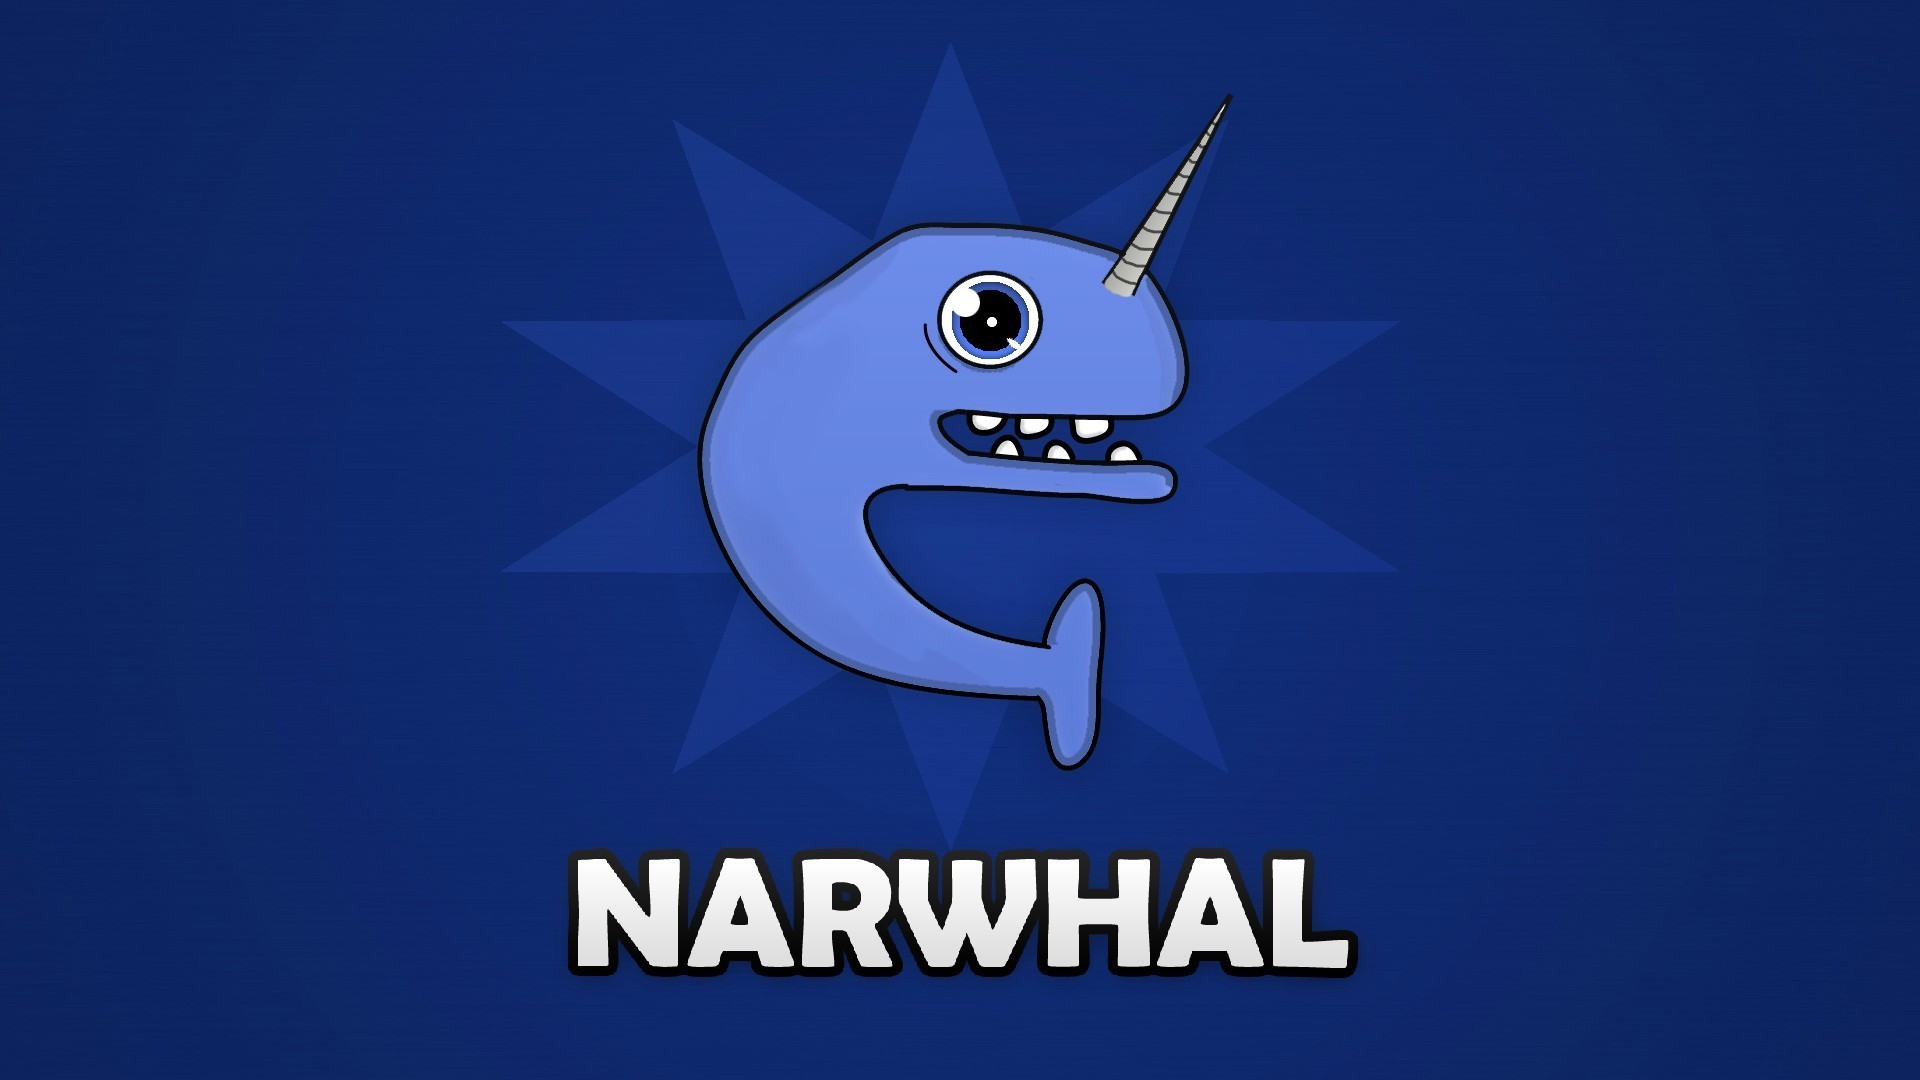 Narwhal Wallpapers HD Wallpapers Download Free Map Images Wallpaper [wallpaper684.blogspot.com]